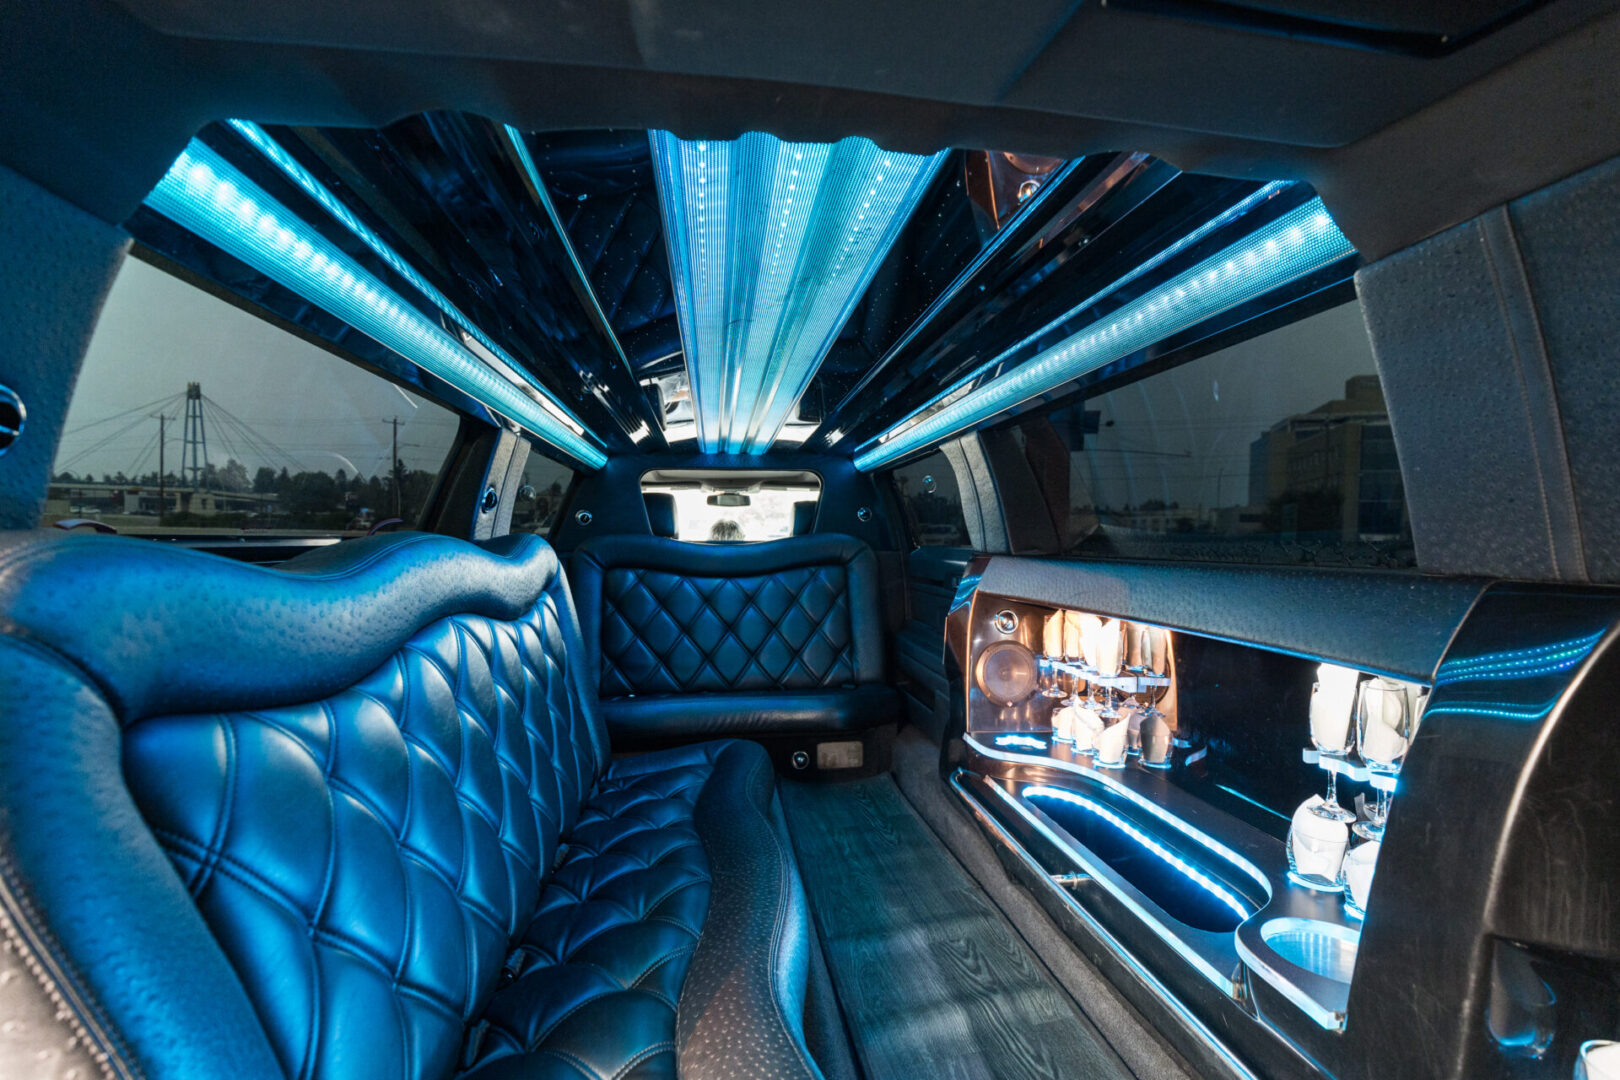 A limo with blue leather seats and lights on the ceiling.